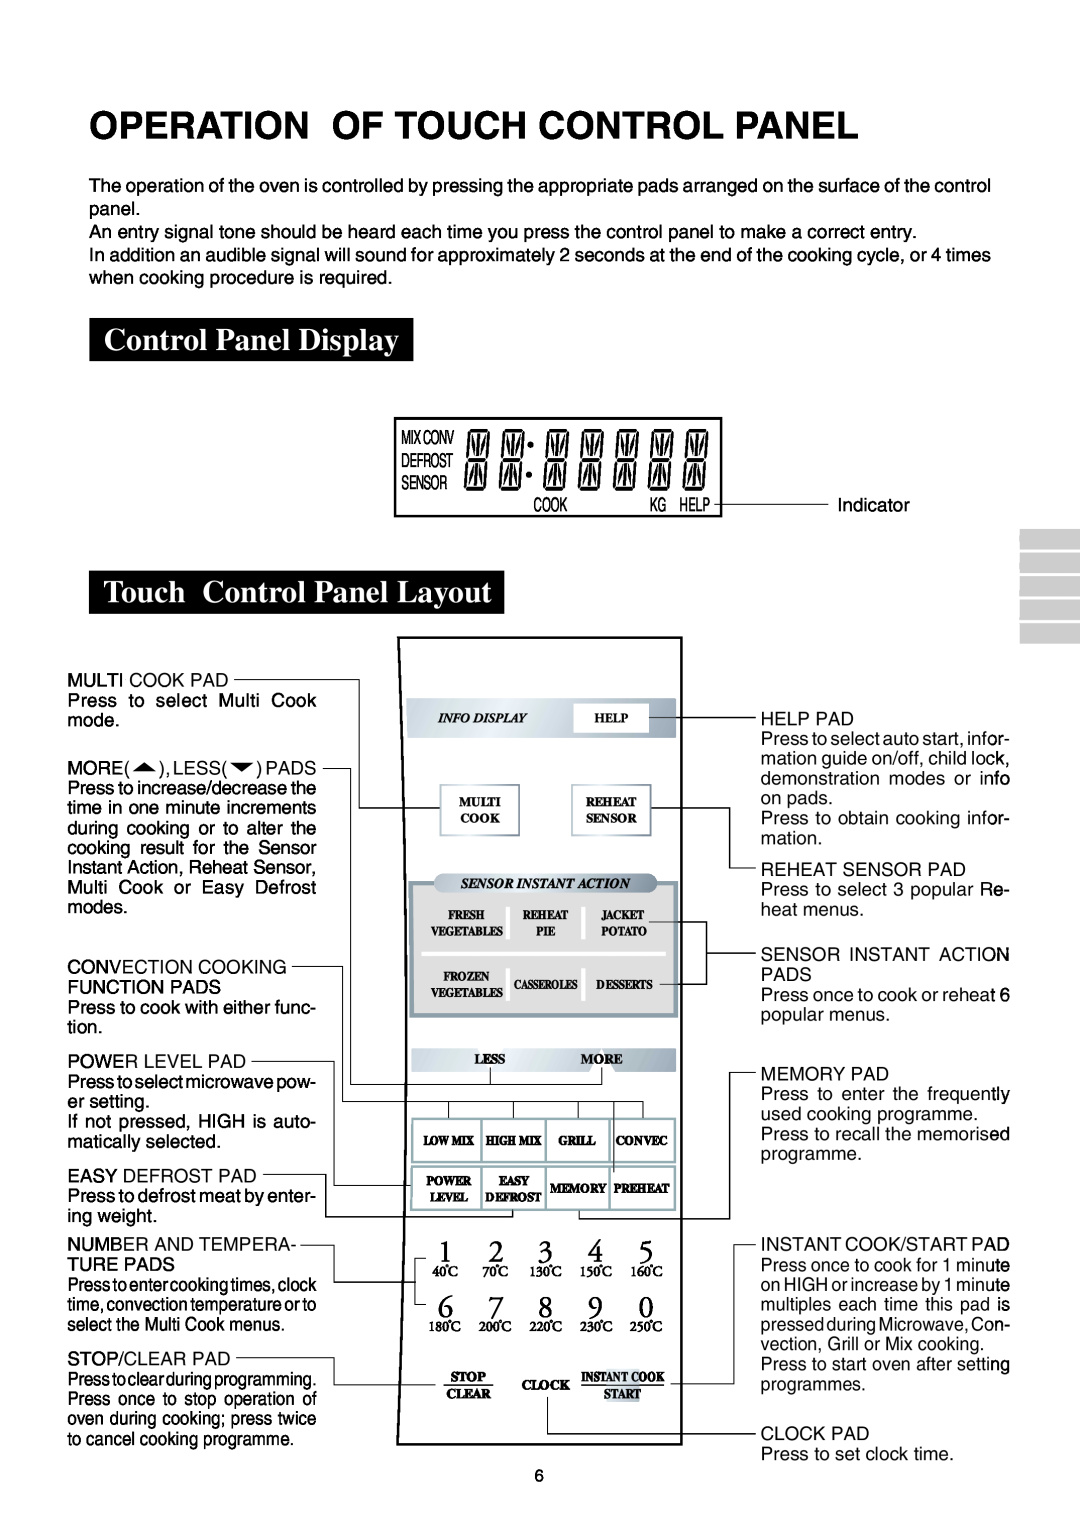 Sharp R-980E operation manual Operation Of Touch Control Panel, Control Panel Display, Touch Control Panel Layout 